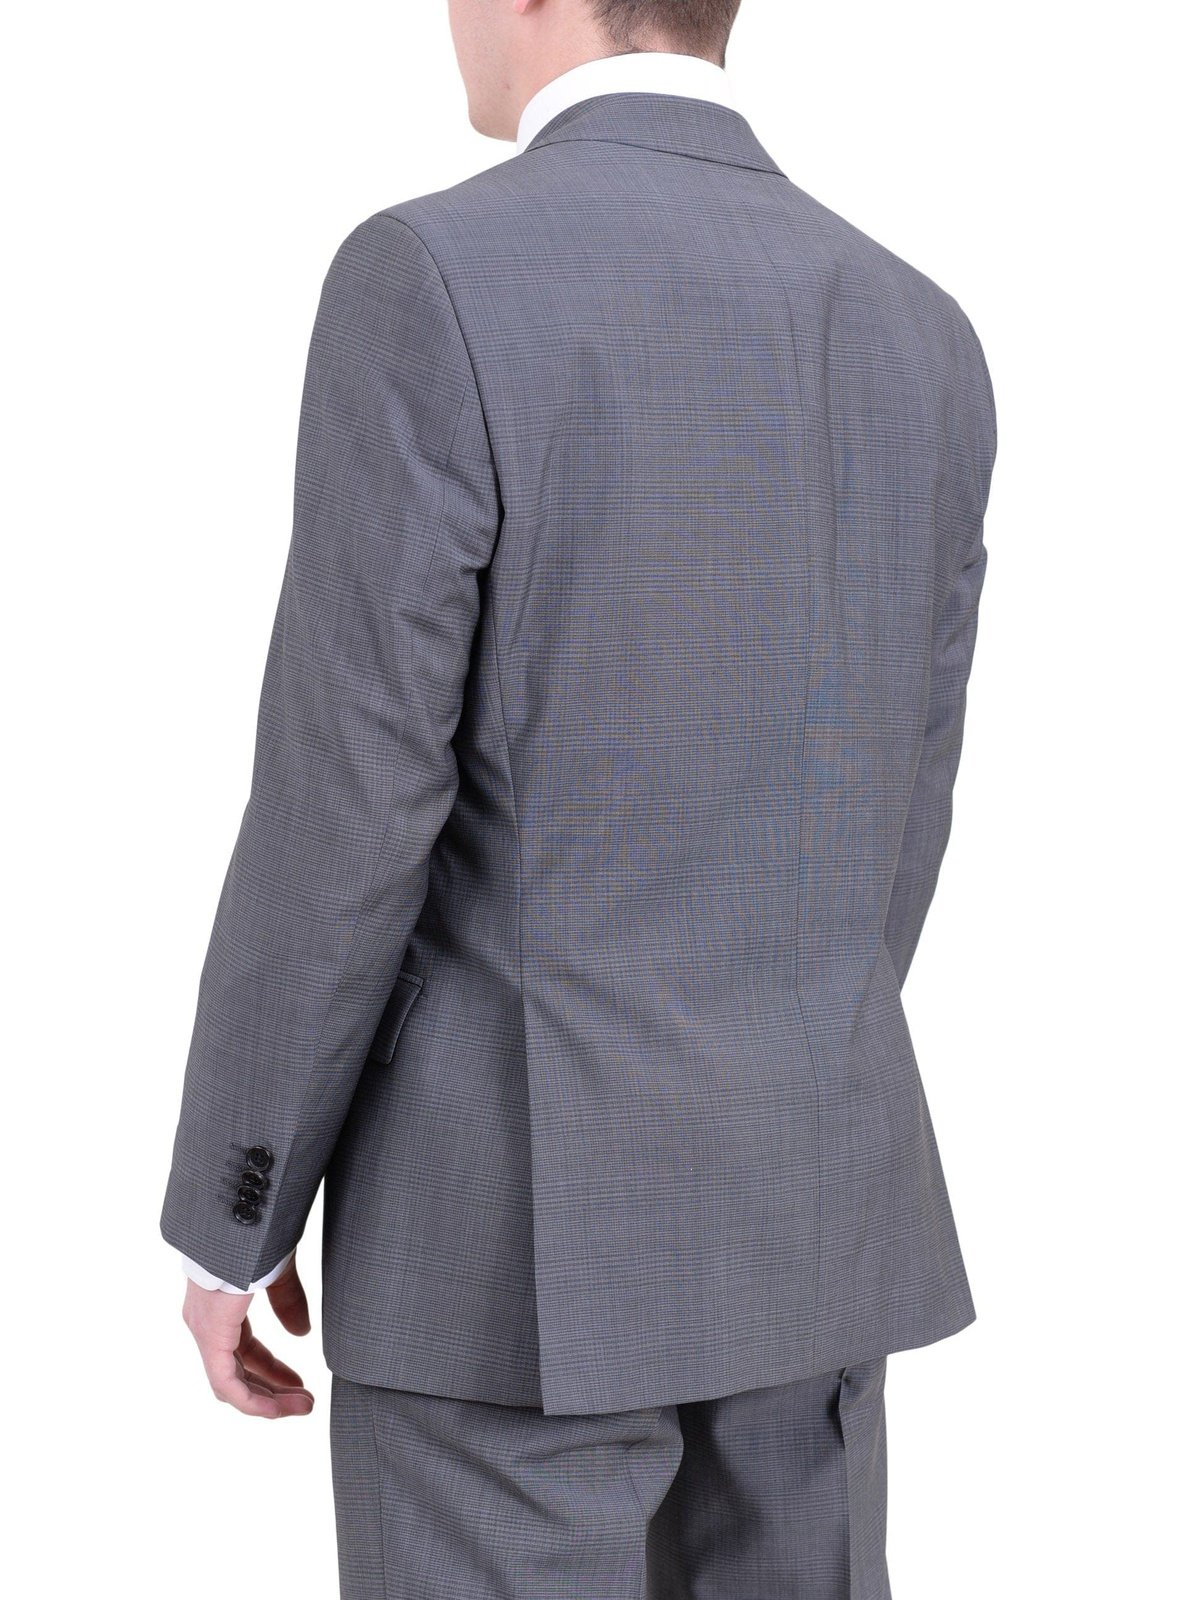 HUGO BOSS TWO PIECE SUITS Hugo Boss Paolini1/movio1 Classic Fit Gray Plaid Two Button Wool Suit